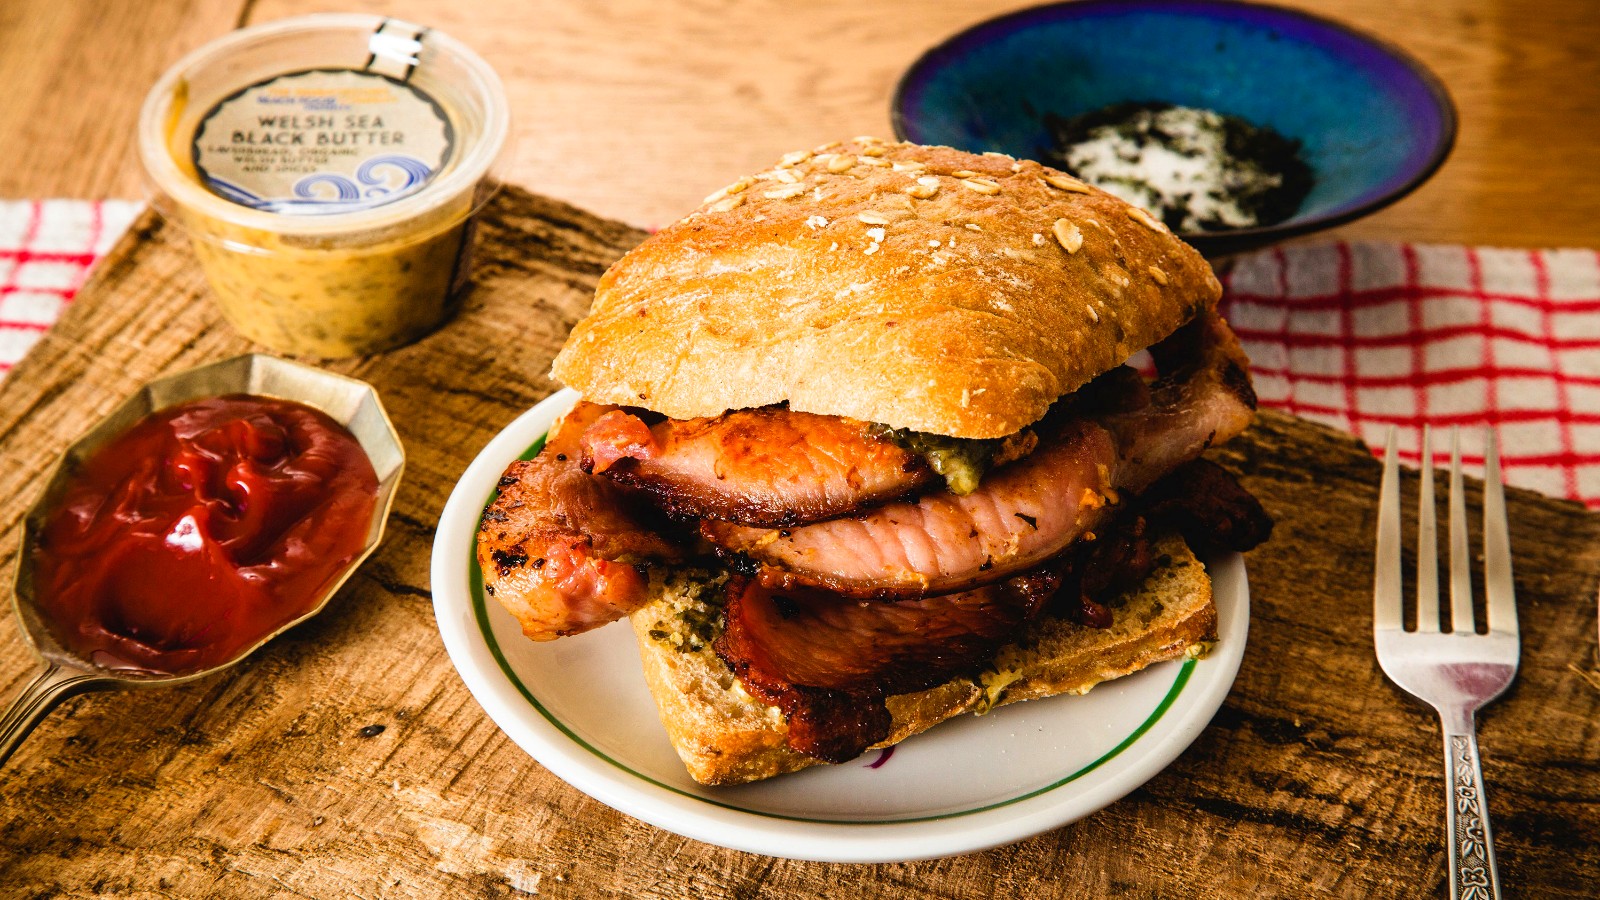 Image of The Best Bacon Butty in the West